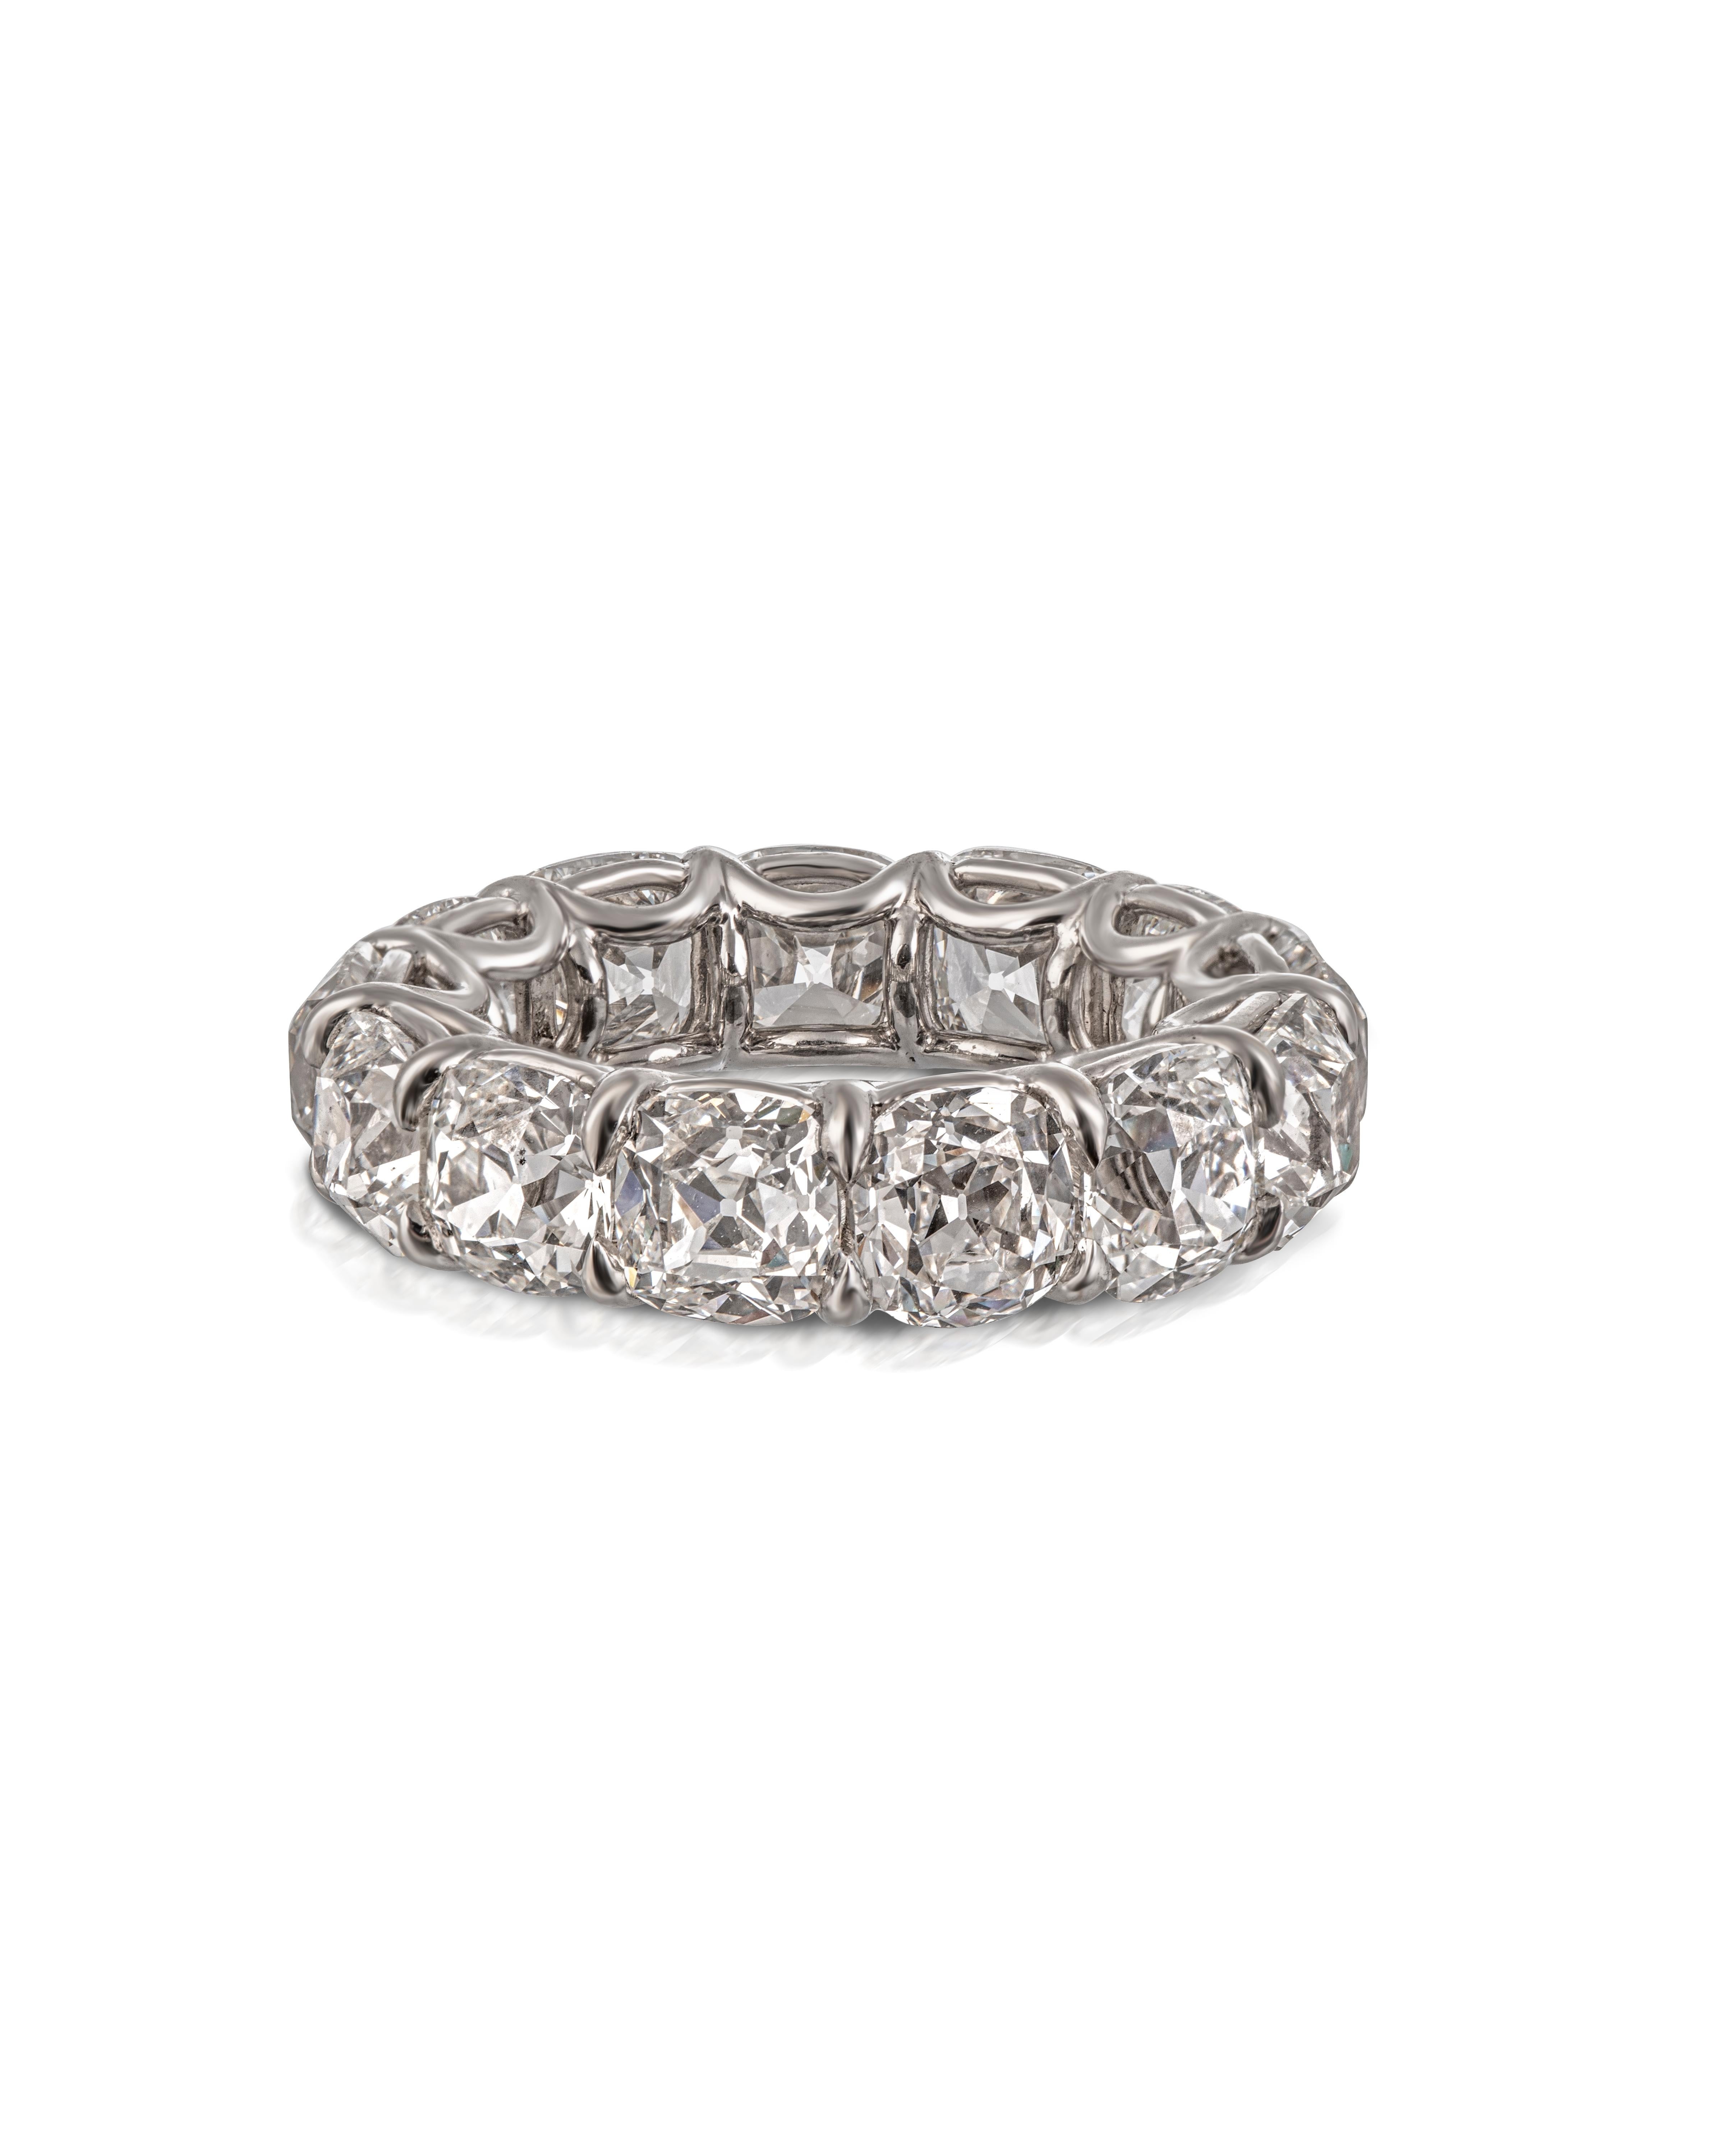 A GIA Certified Eternity Ring Comprising of 13 Diamonds in Platinum
This fabulous diamond eternity ring comprises of 13 GIA certified brilliant cut diamonds. 9 of the diamonds are over 1 carat and 4 are slightly under 1 carat. The well matched and